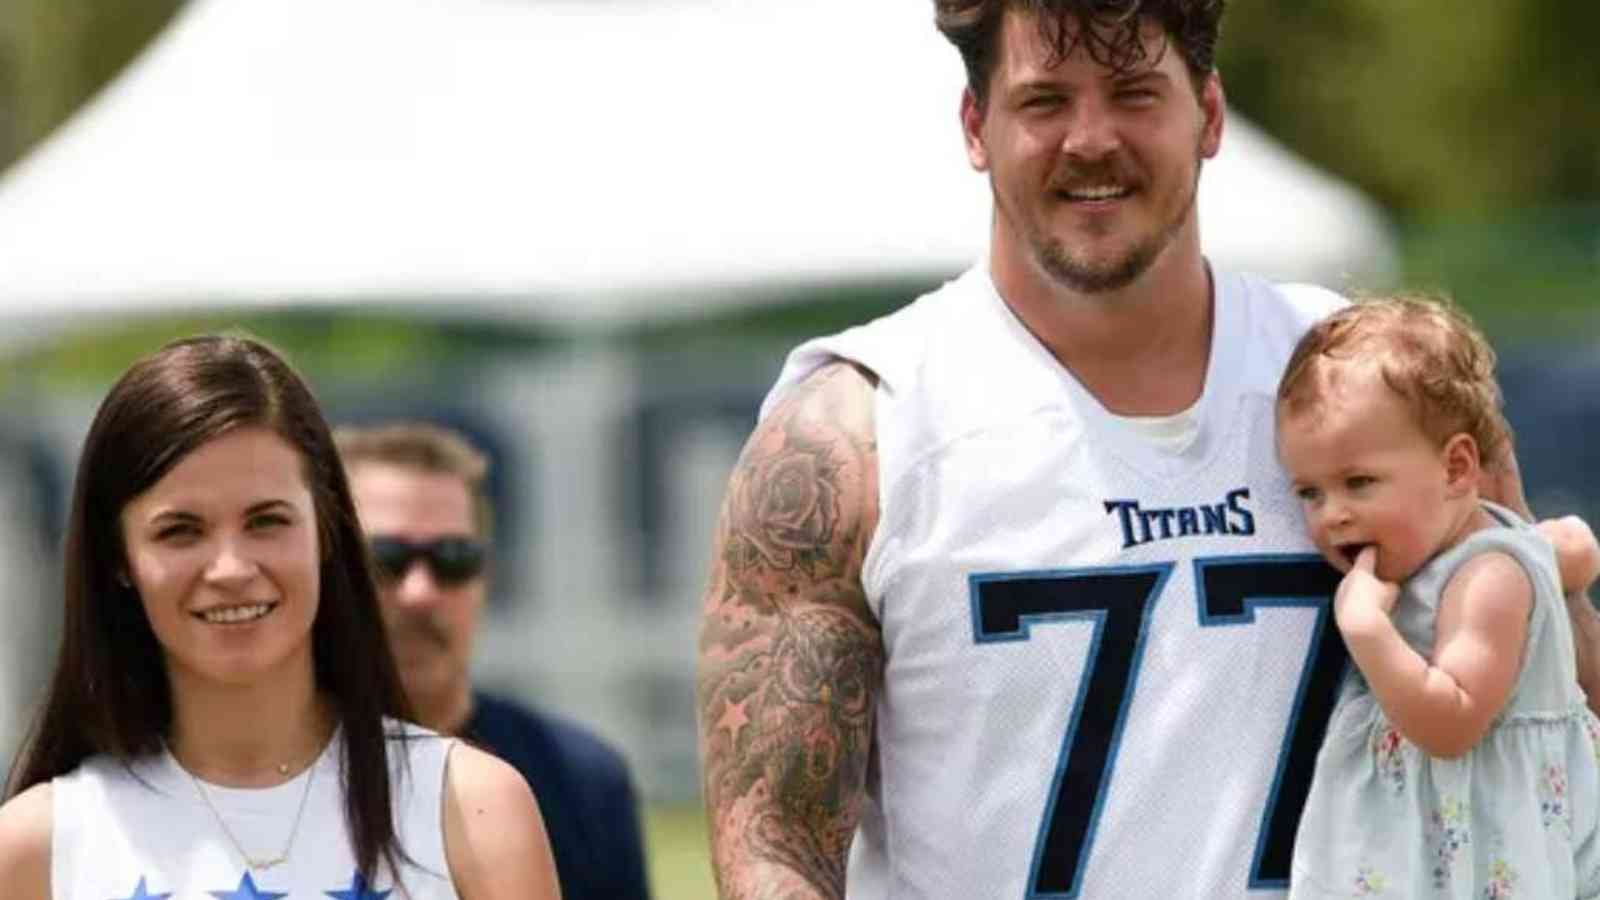 Is Taylor Lewan gay? Who is the wife of Taylor Lewan?